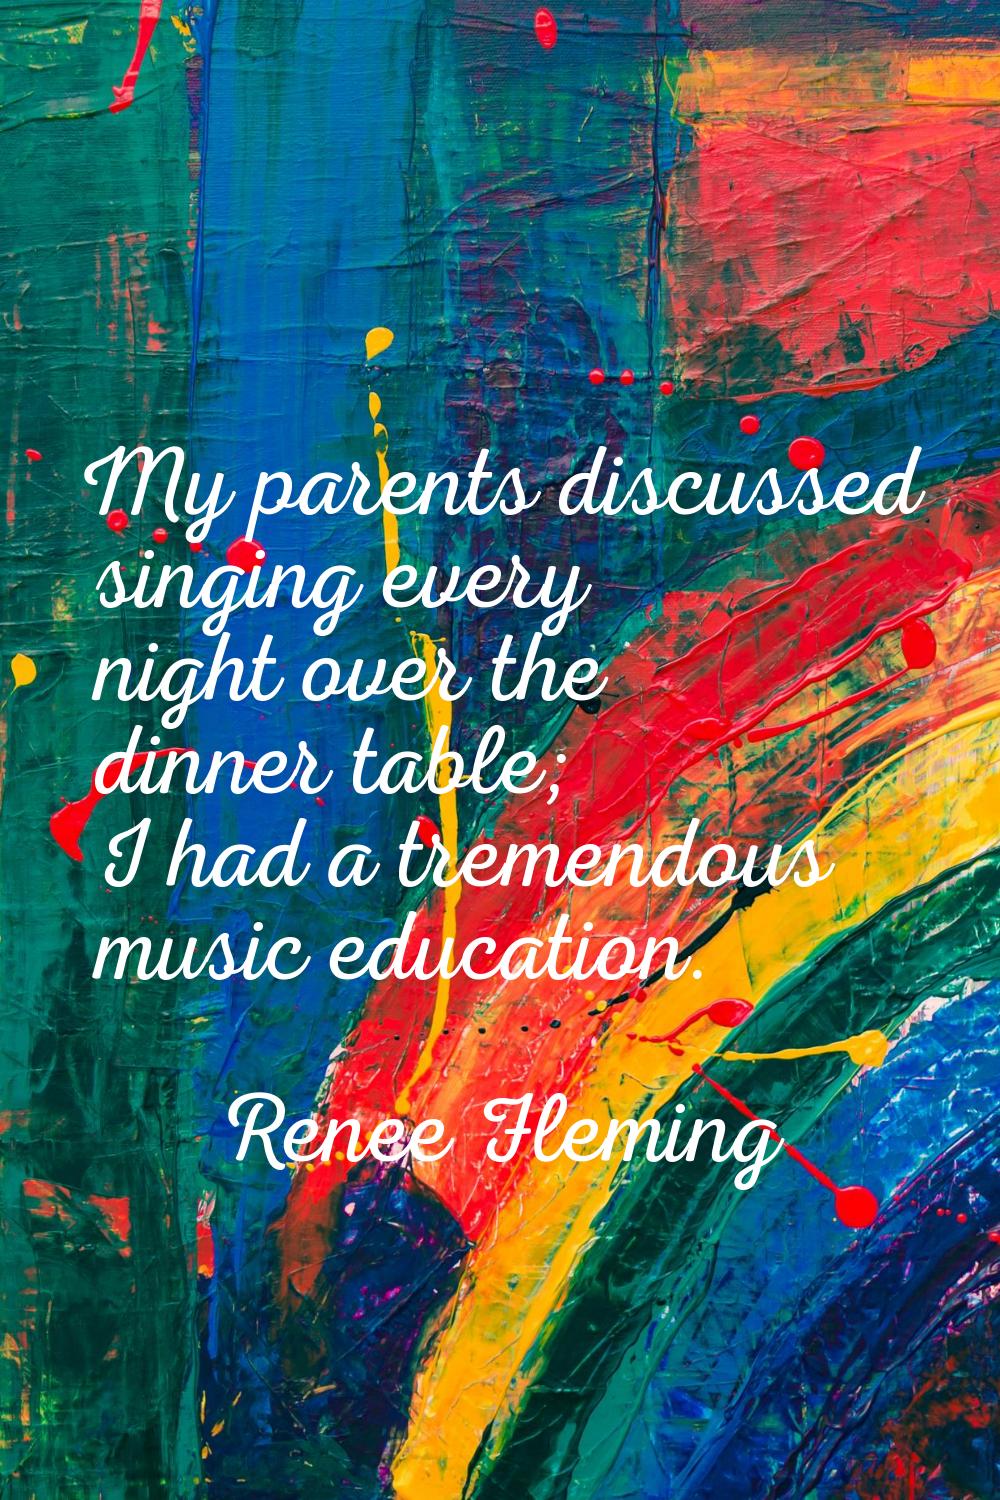 My parents discussed singing every night over the dinner table; I had a tremendous music education.